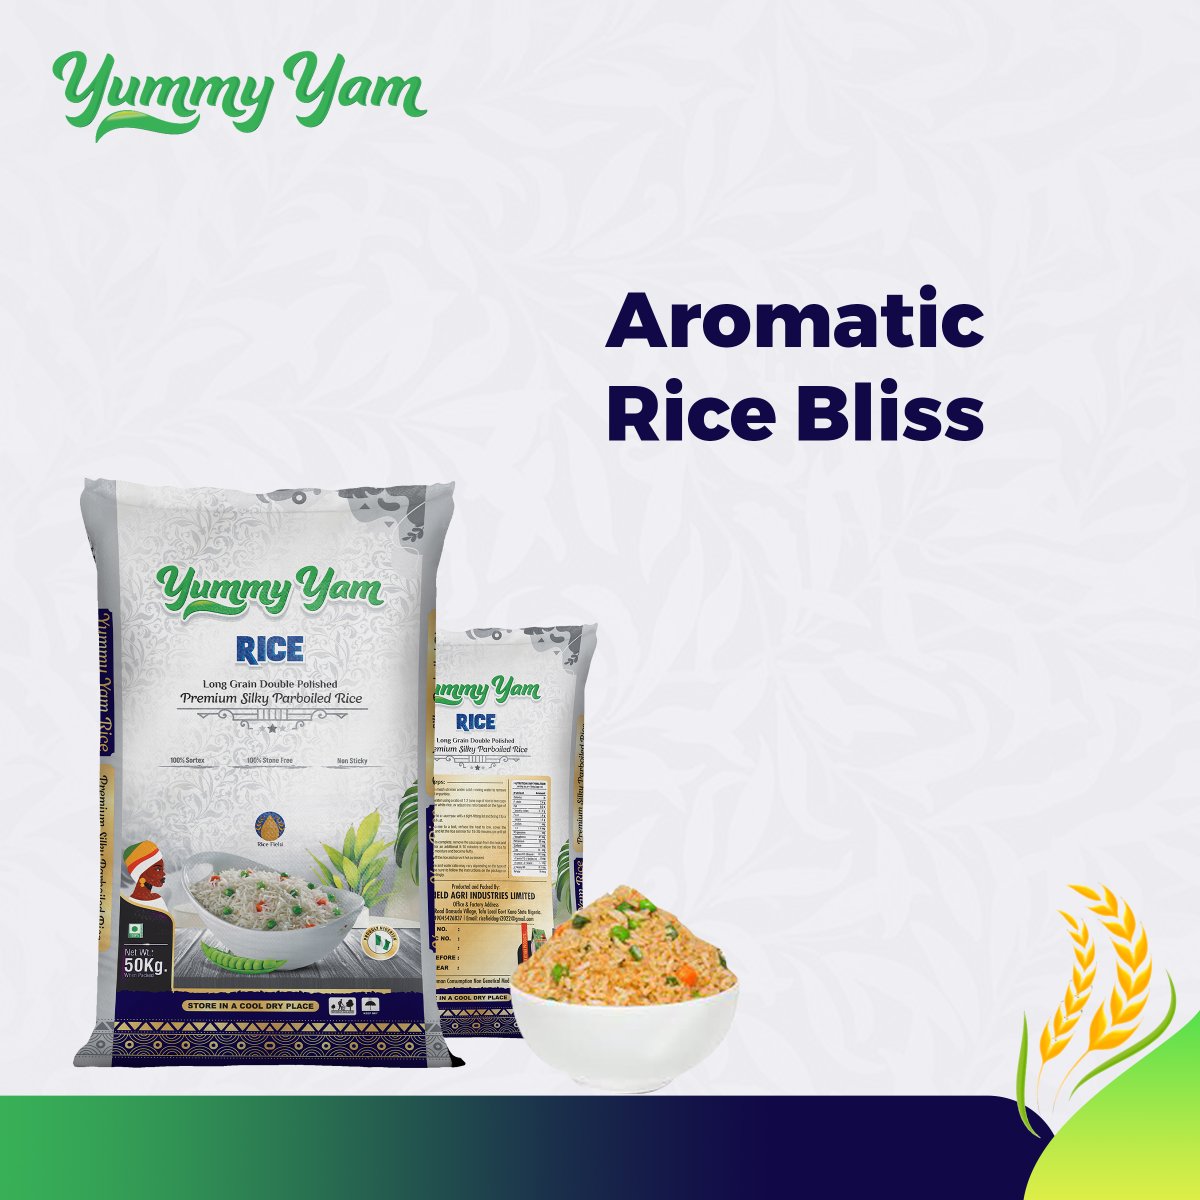 Indulge in Aromatic Rice Bliss#AromaticRiceBliss #RicePerfection #FlavorfulRice #FoodieDelights #RiceLovers #FoodieParadise #TasteBudSensation #FoodGasm #FoodiesOfInstagram #FoodCravings #FoodieExperience #FoodieJourney #FoodieLife #FoodHeaven #RiceMagic #DeliciouslyScented